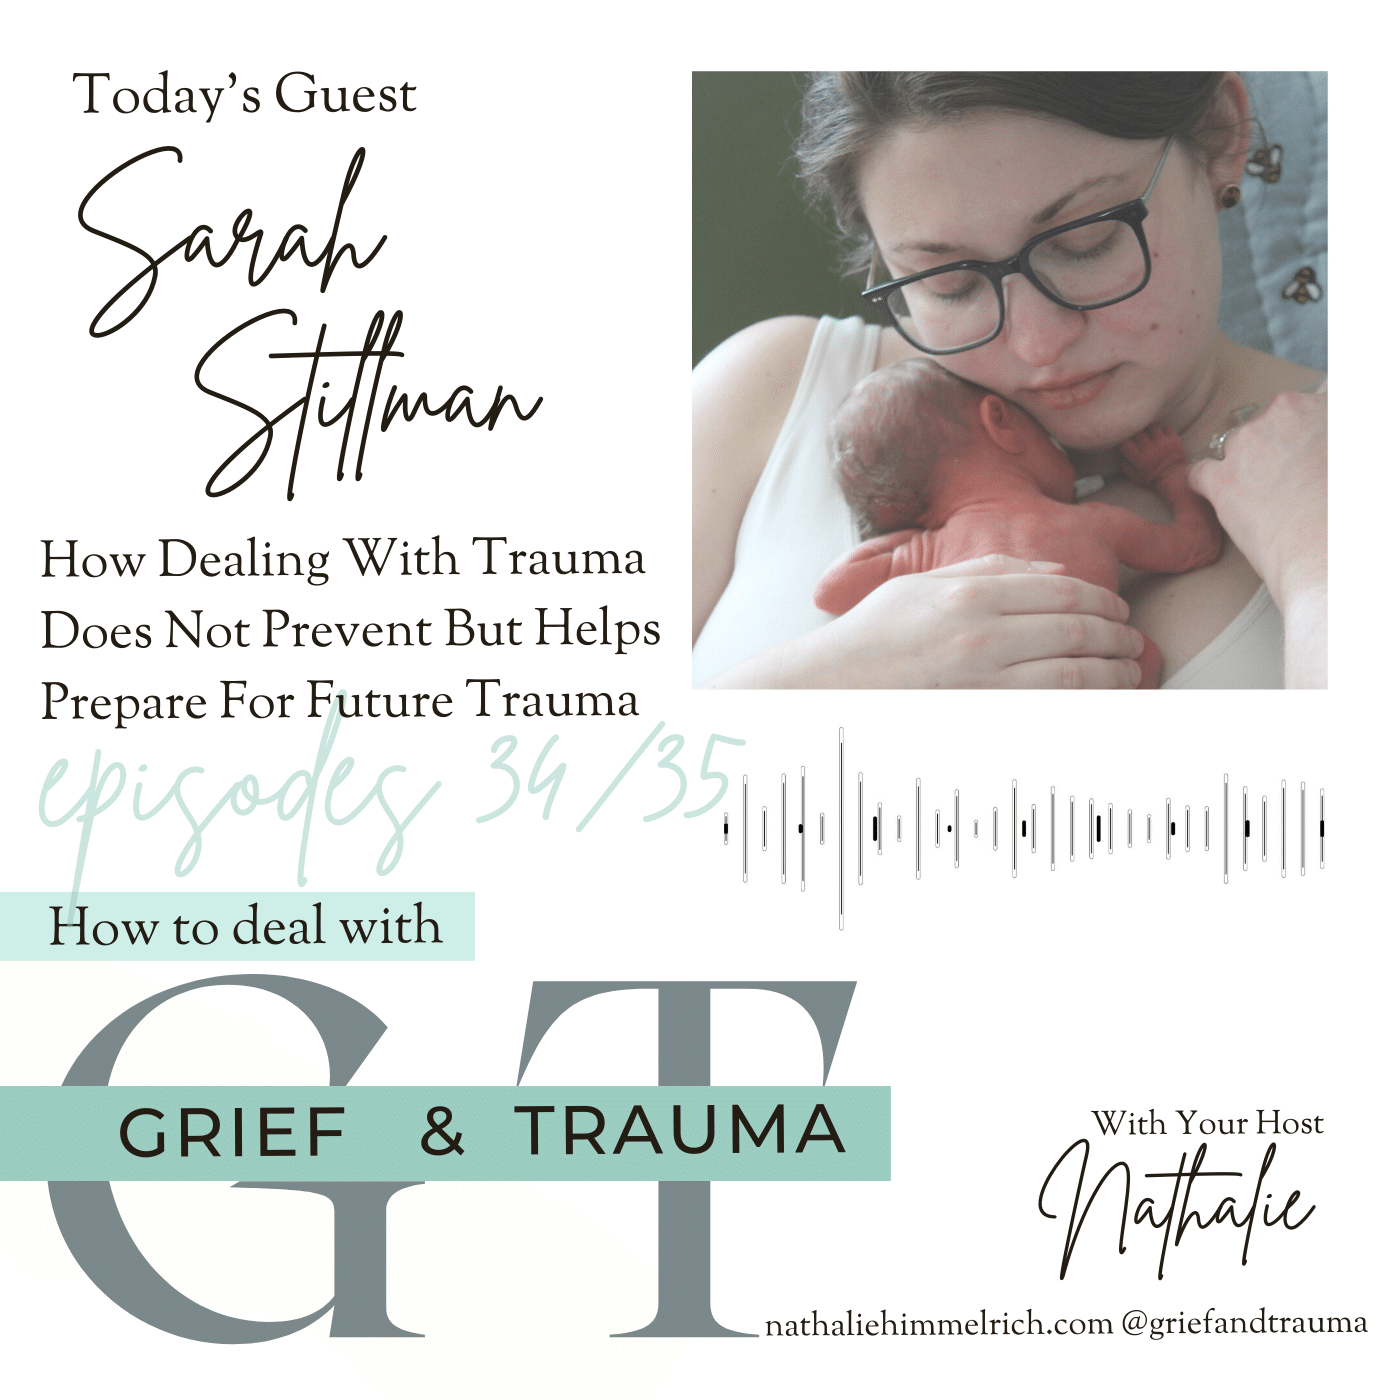 Sarah Stillman on How Dealing With Trauma Does Not Prevent But Helps Prepare For Future Trauma | Episodes 34 and 35